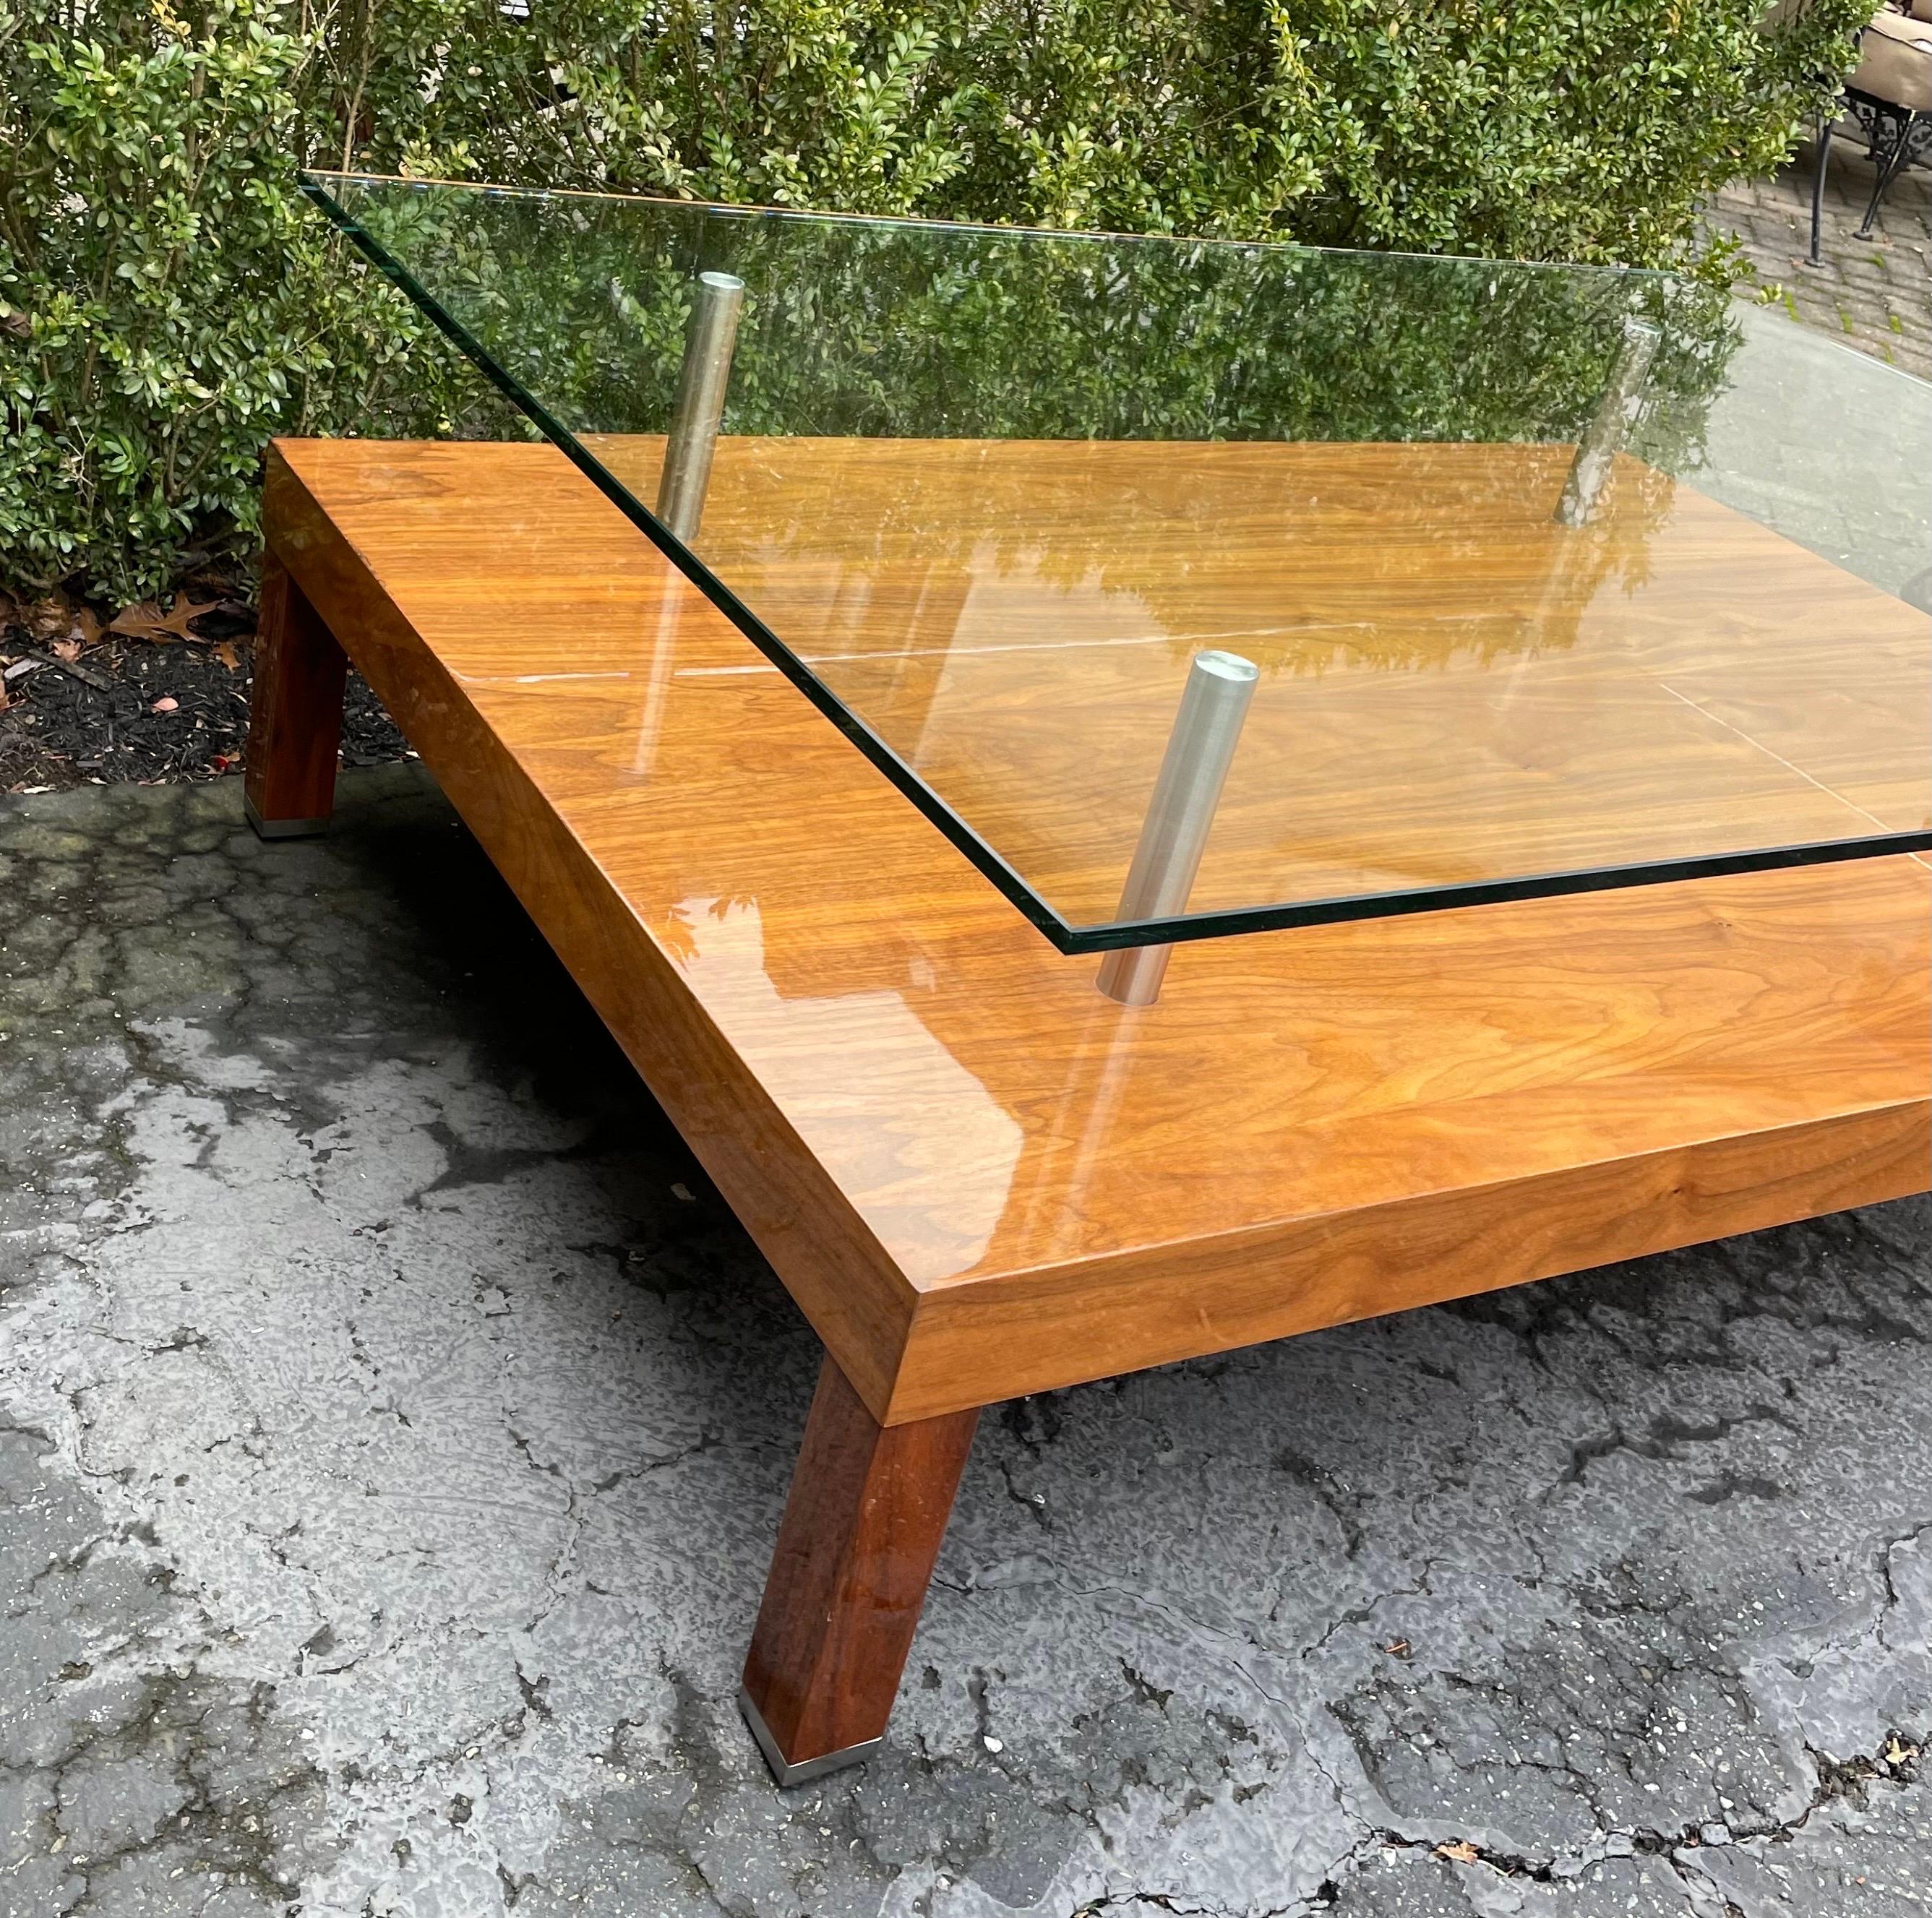 Post-Modern Coffee Table Two-Tiered Wood and Glass Rectangular In The Style of Karl Springer